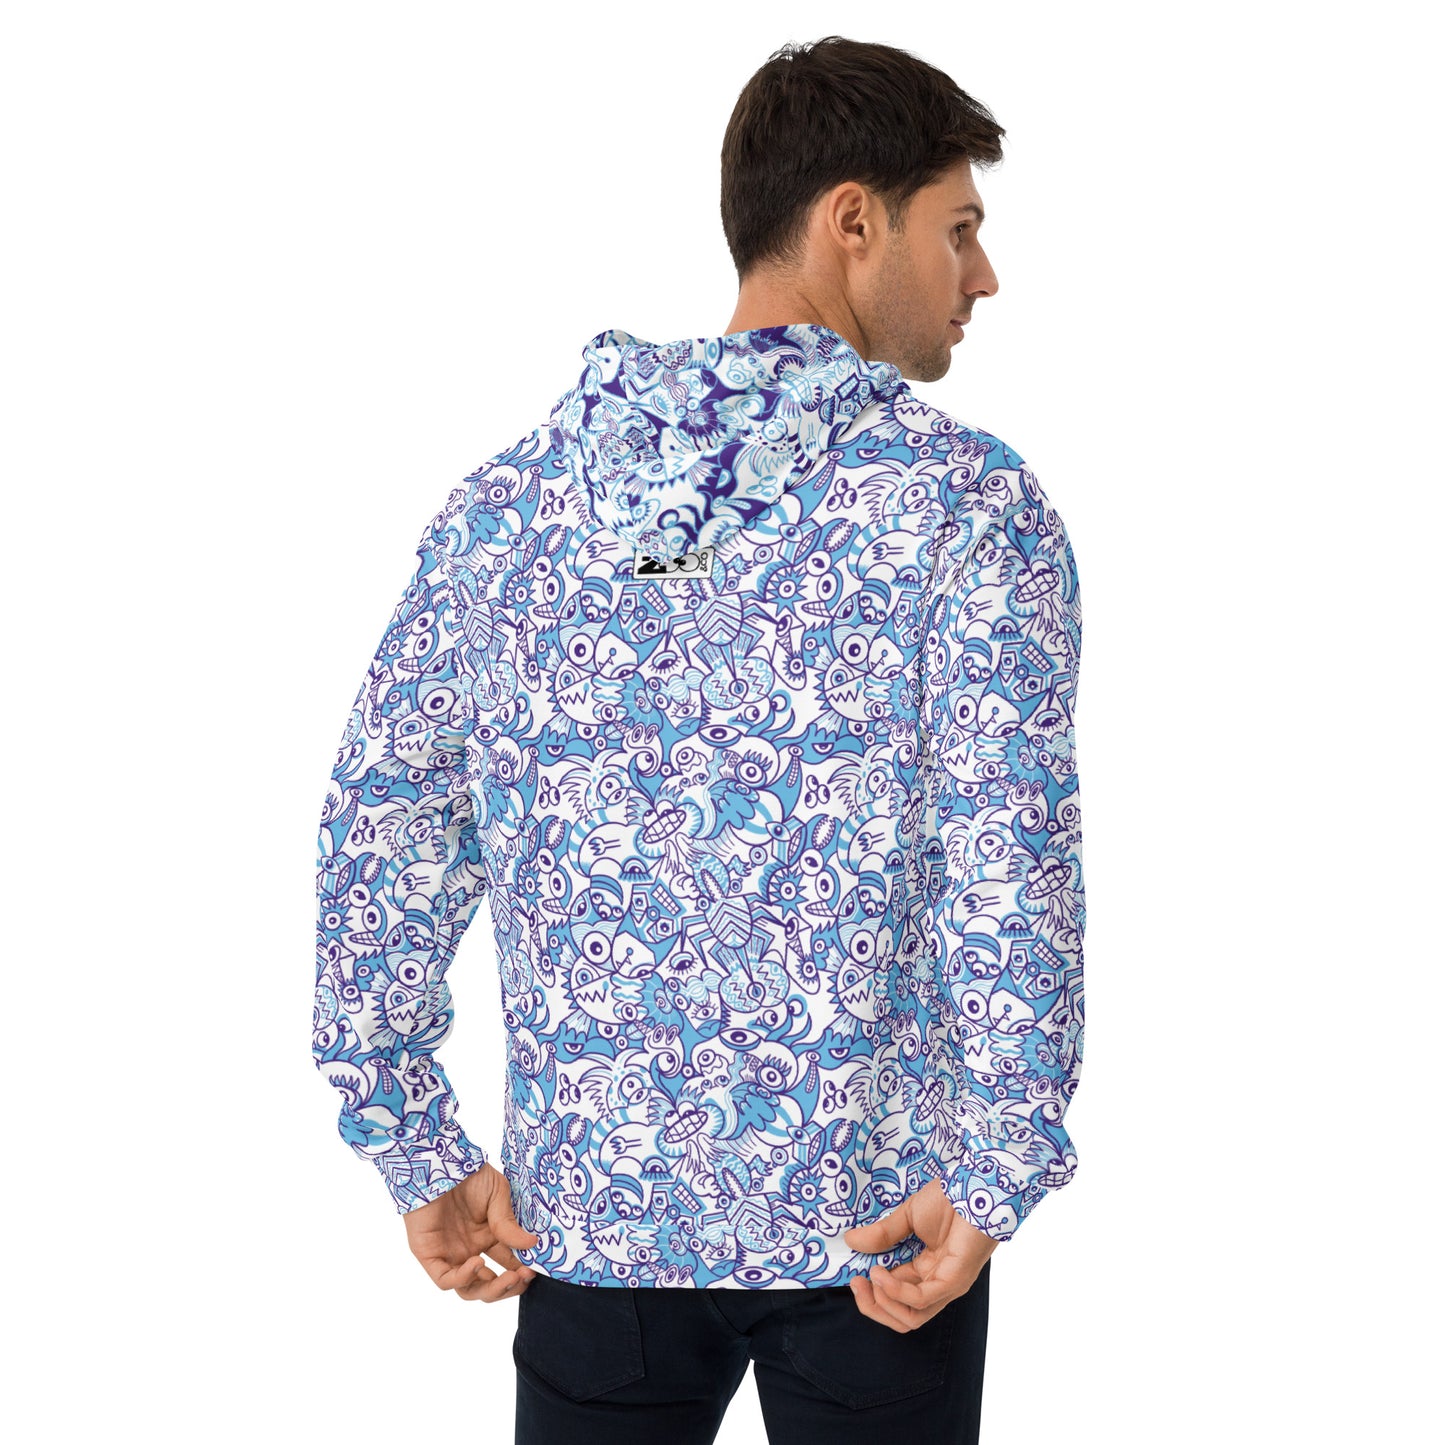 Whimsical Blue Doodle Critterscape pattern design Unisex Hoodie. Back view